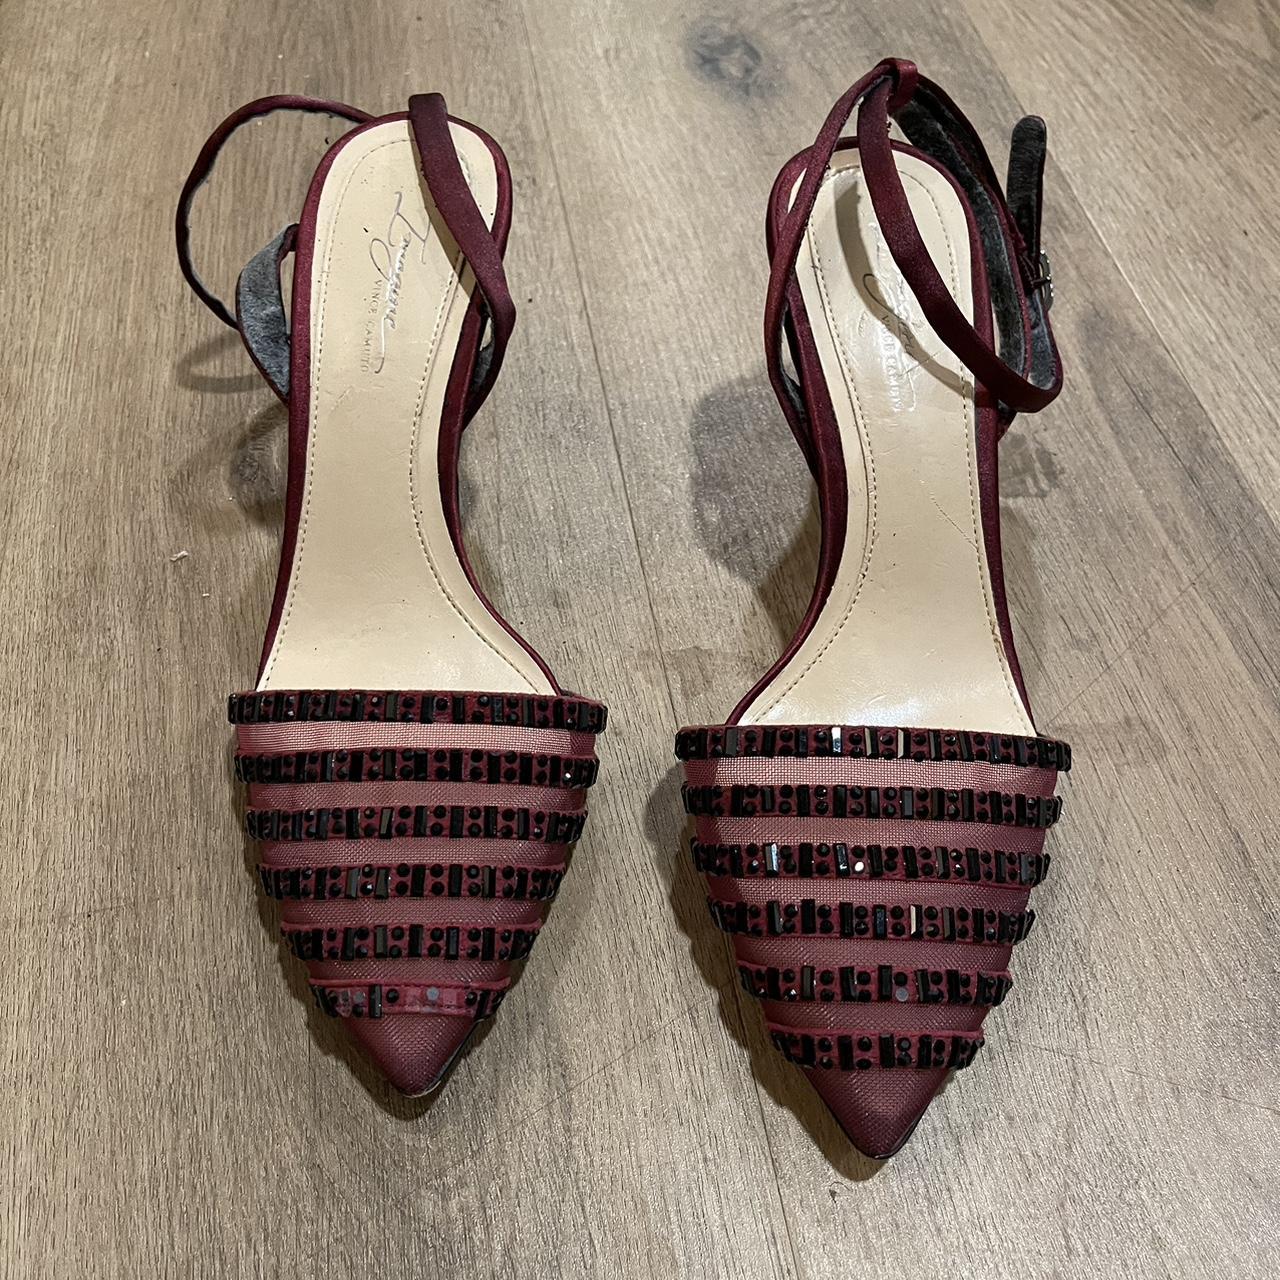 Vince Camuto Women's Burgundy Courts